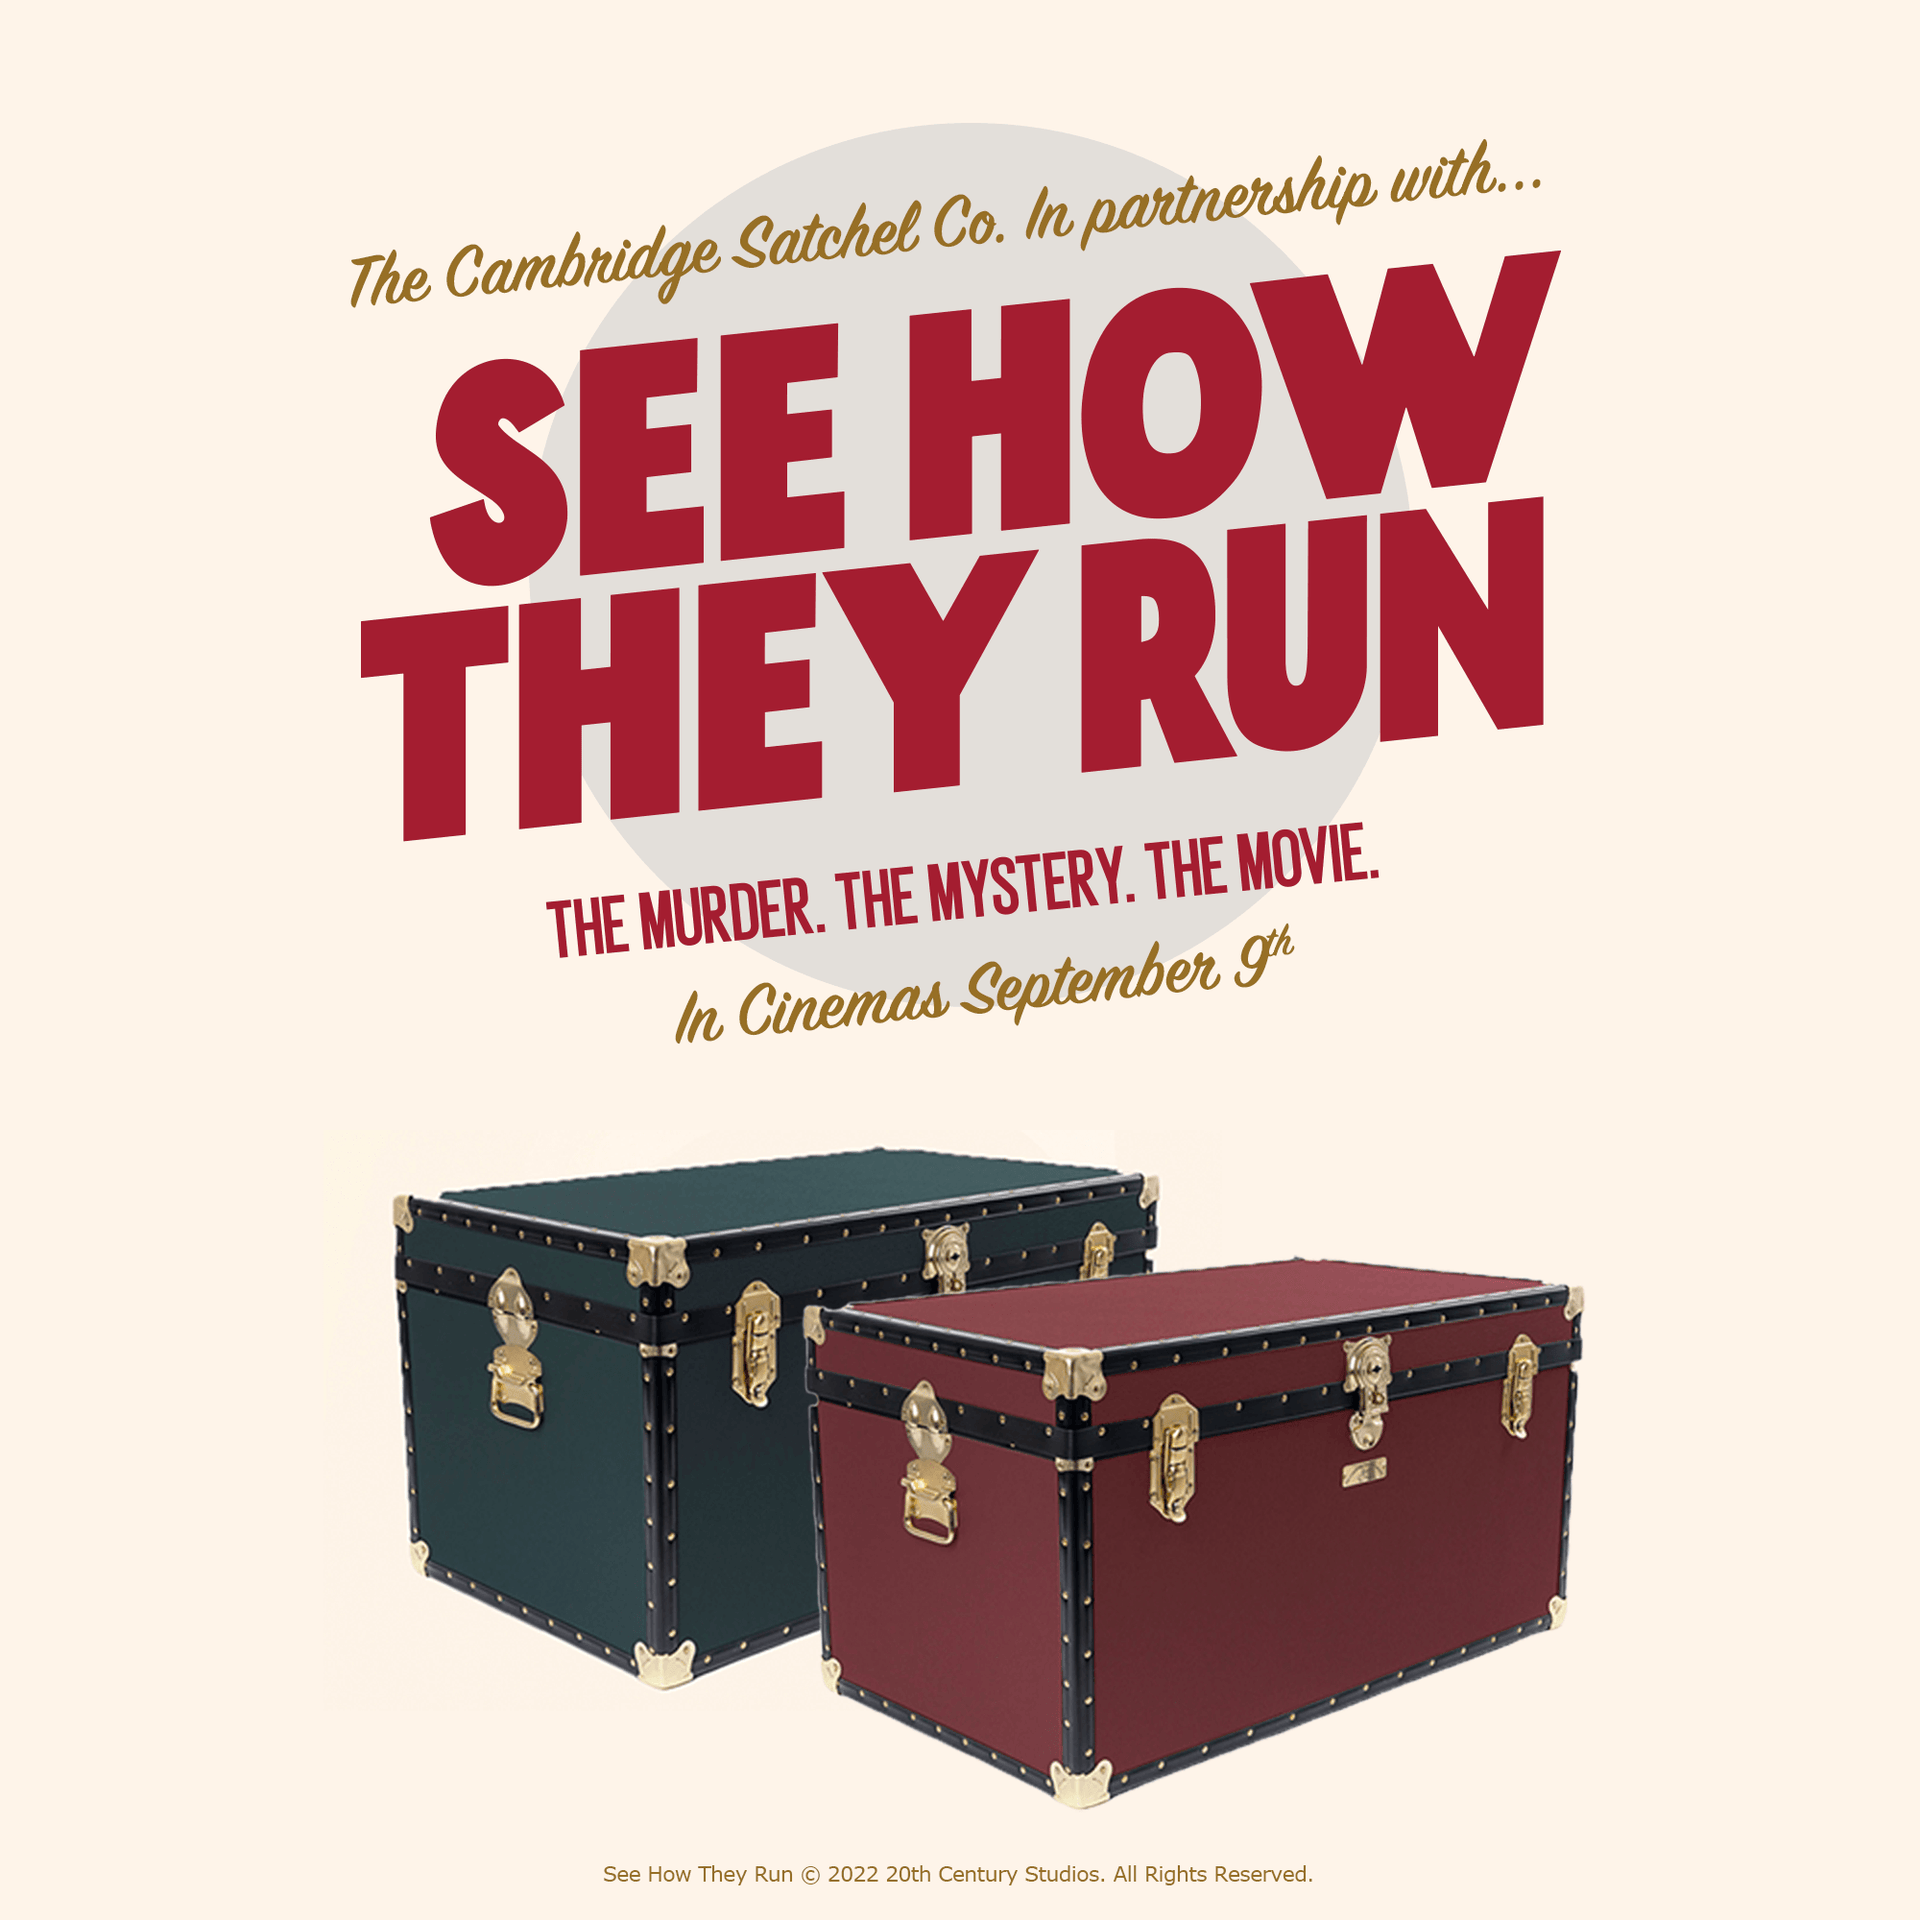 See How They Run - Whodunit? - Cambridge Satchel US Store